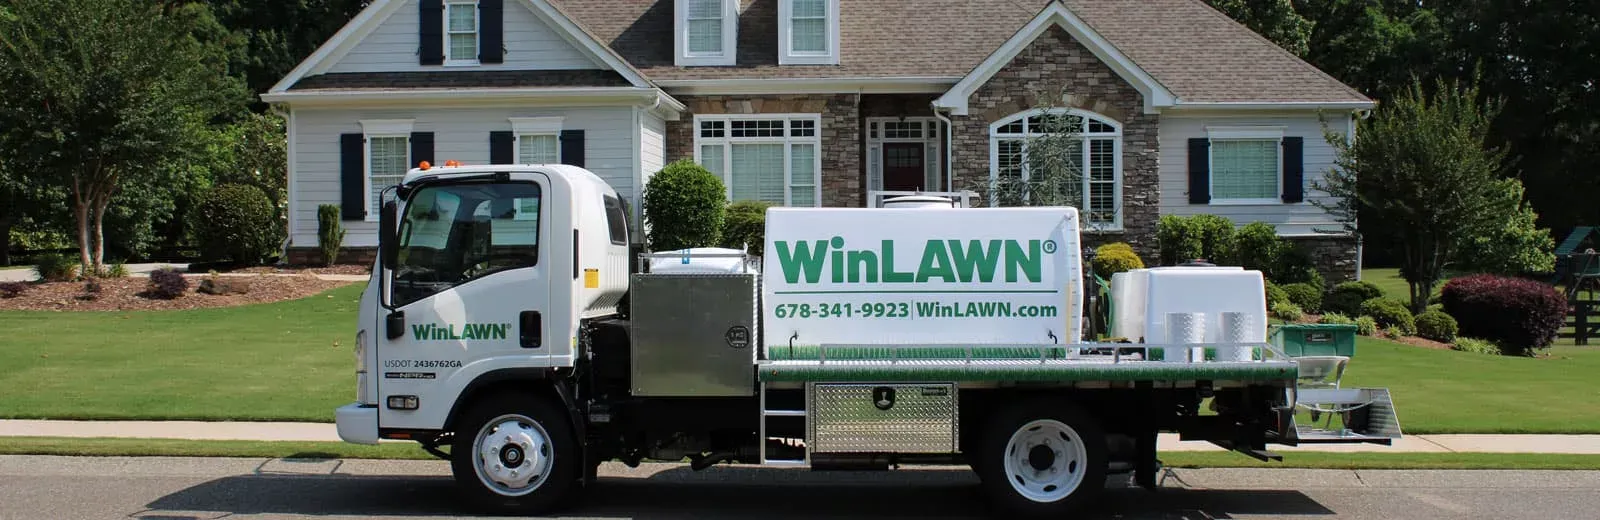 WinLAWN truck parked in front of ranch style home with green healthy grass